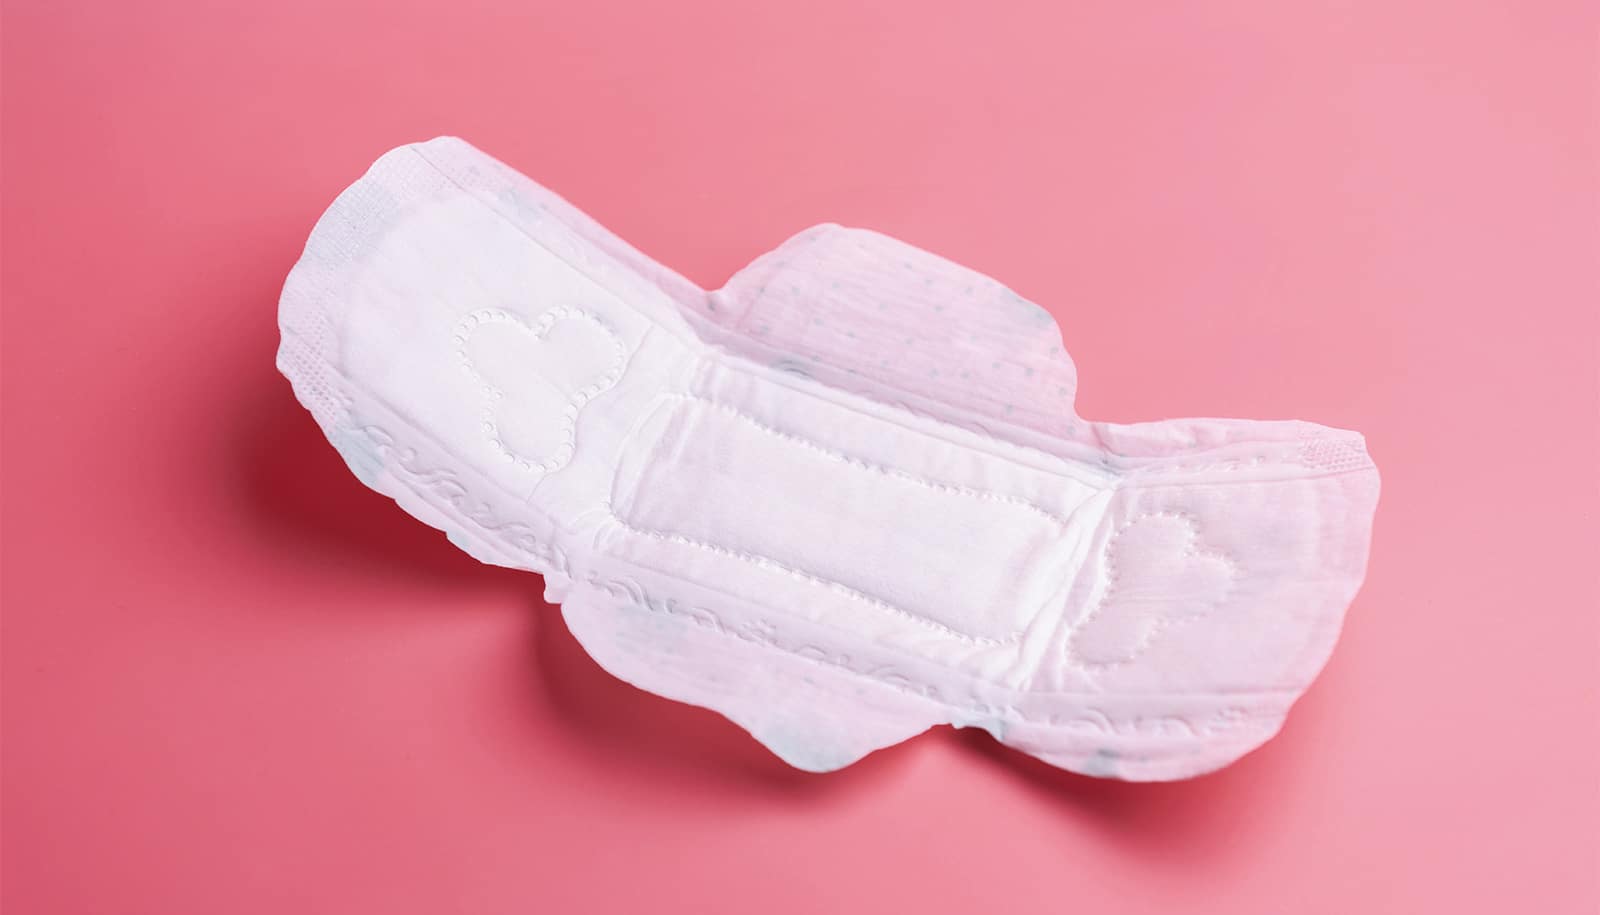 Chemicals of Concern in Feminine Care Products